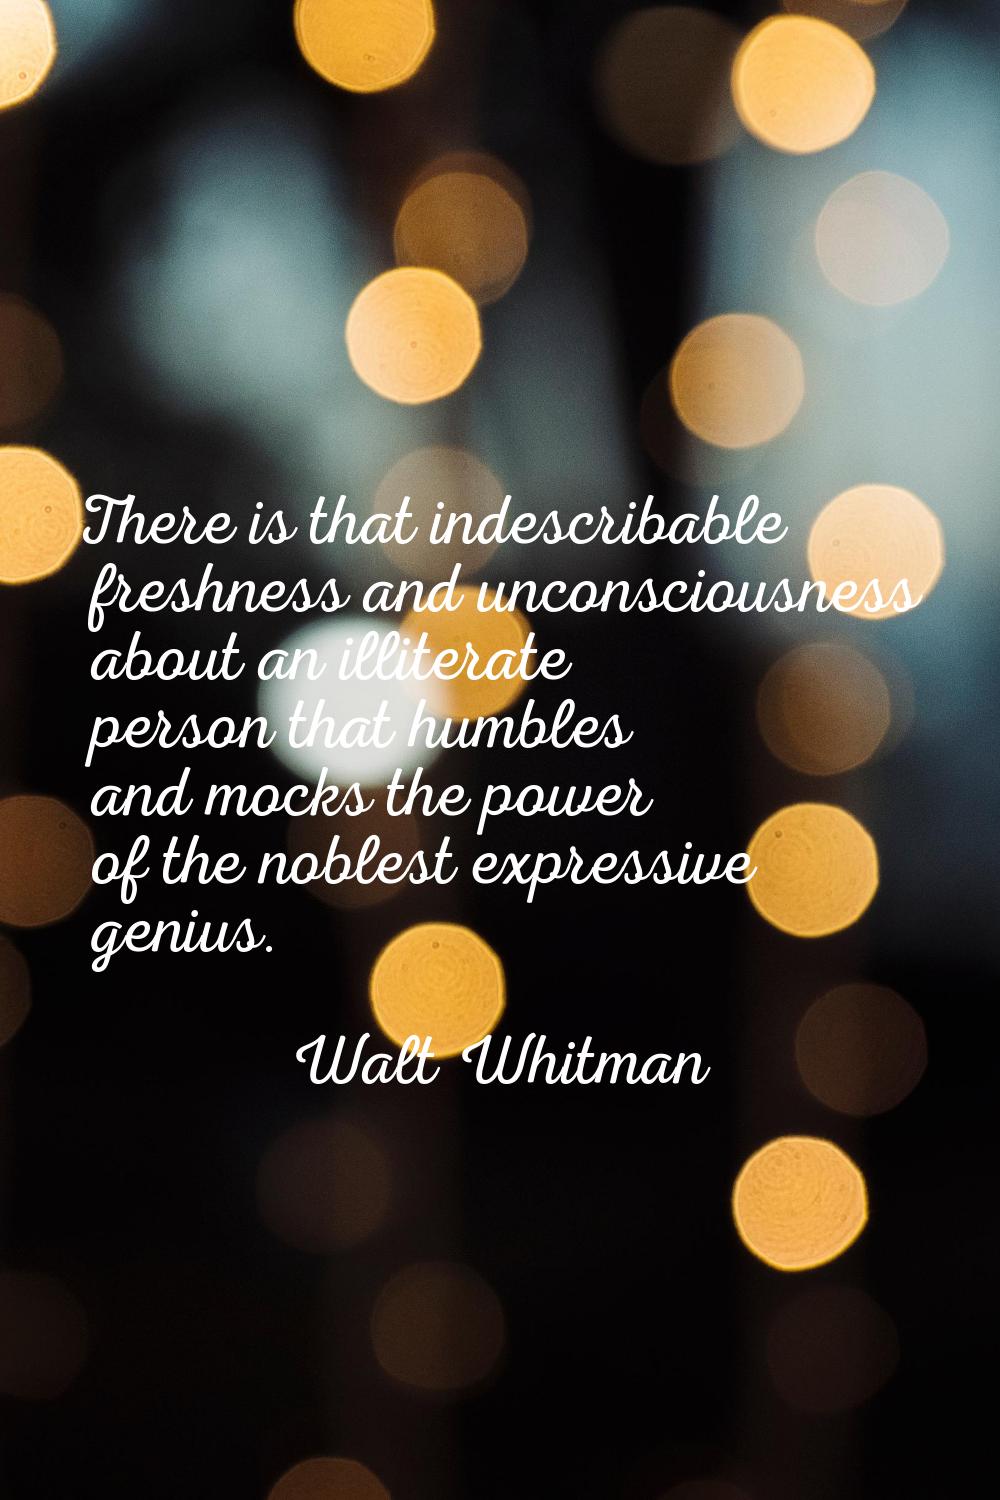 There is that indescribable freshness and unconsciousness about an illiterate person that humbles a